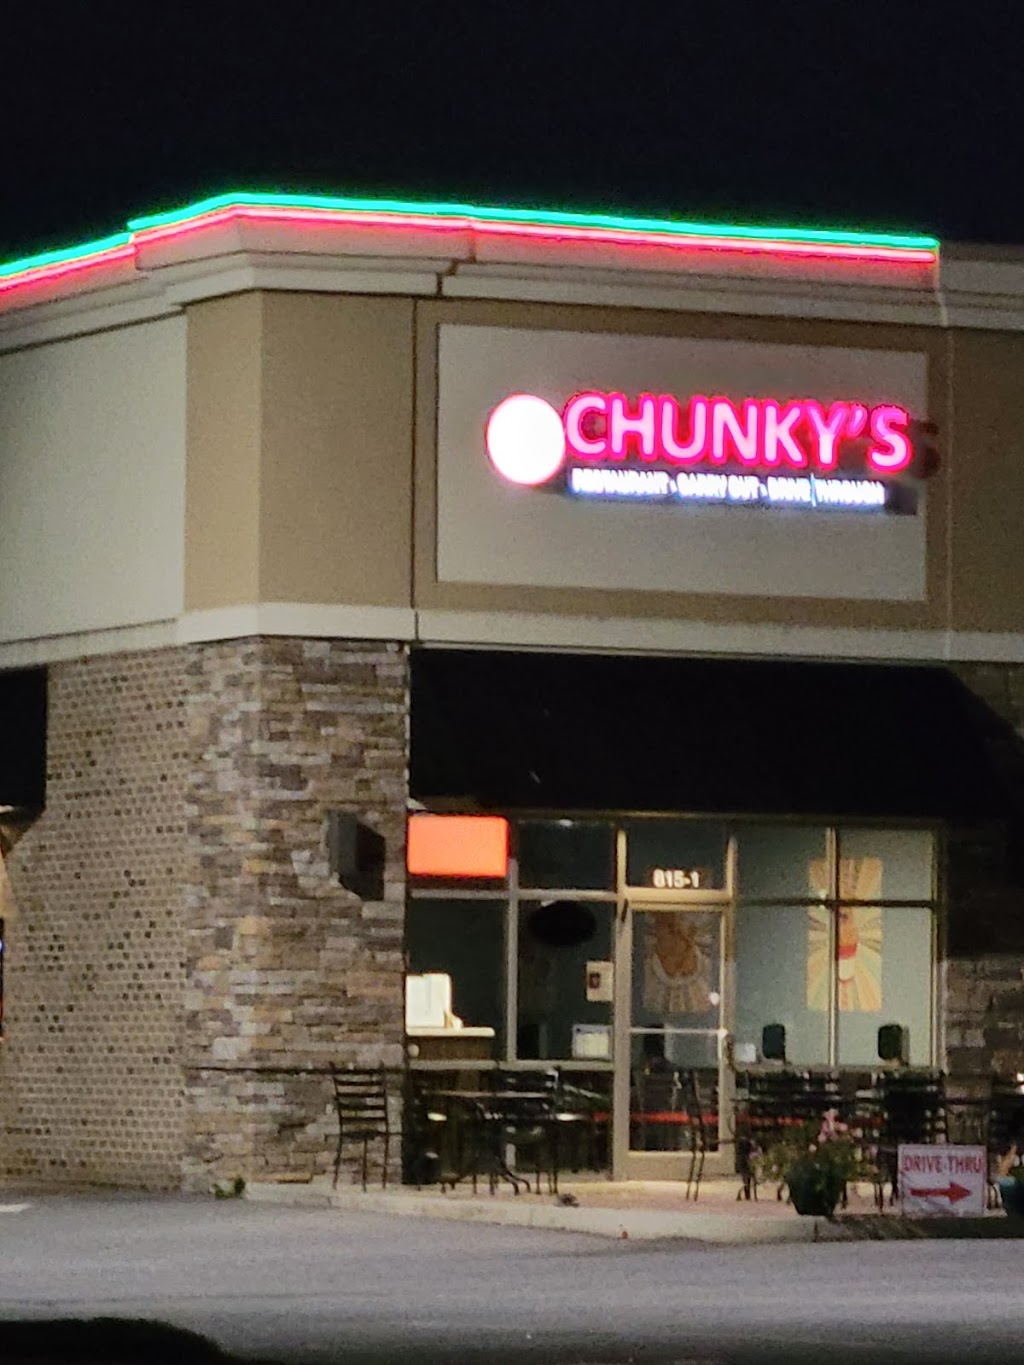 CHUNKYS | restaurant | 815 W Greenwood St, Abbeville, SC 29620, USA | 8643665055 OR +1 864-366-5055